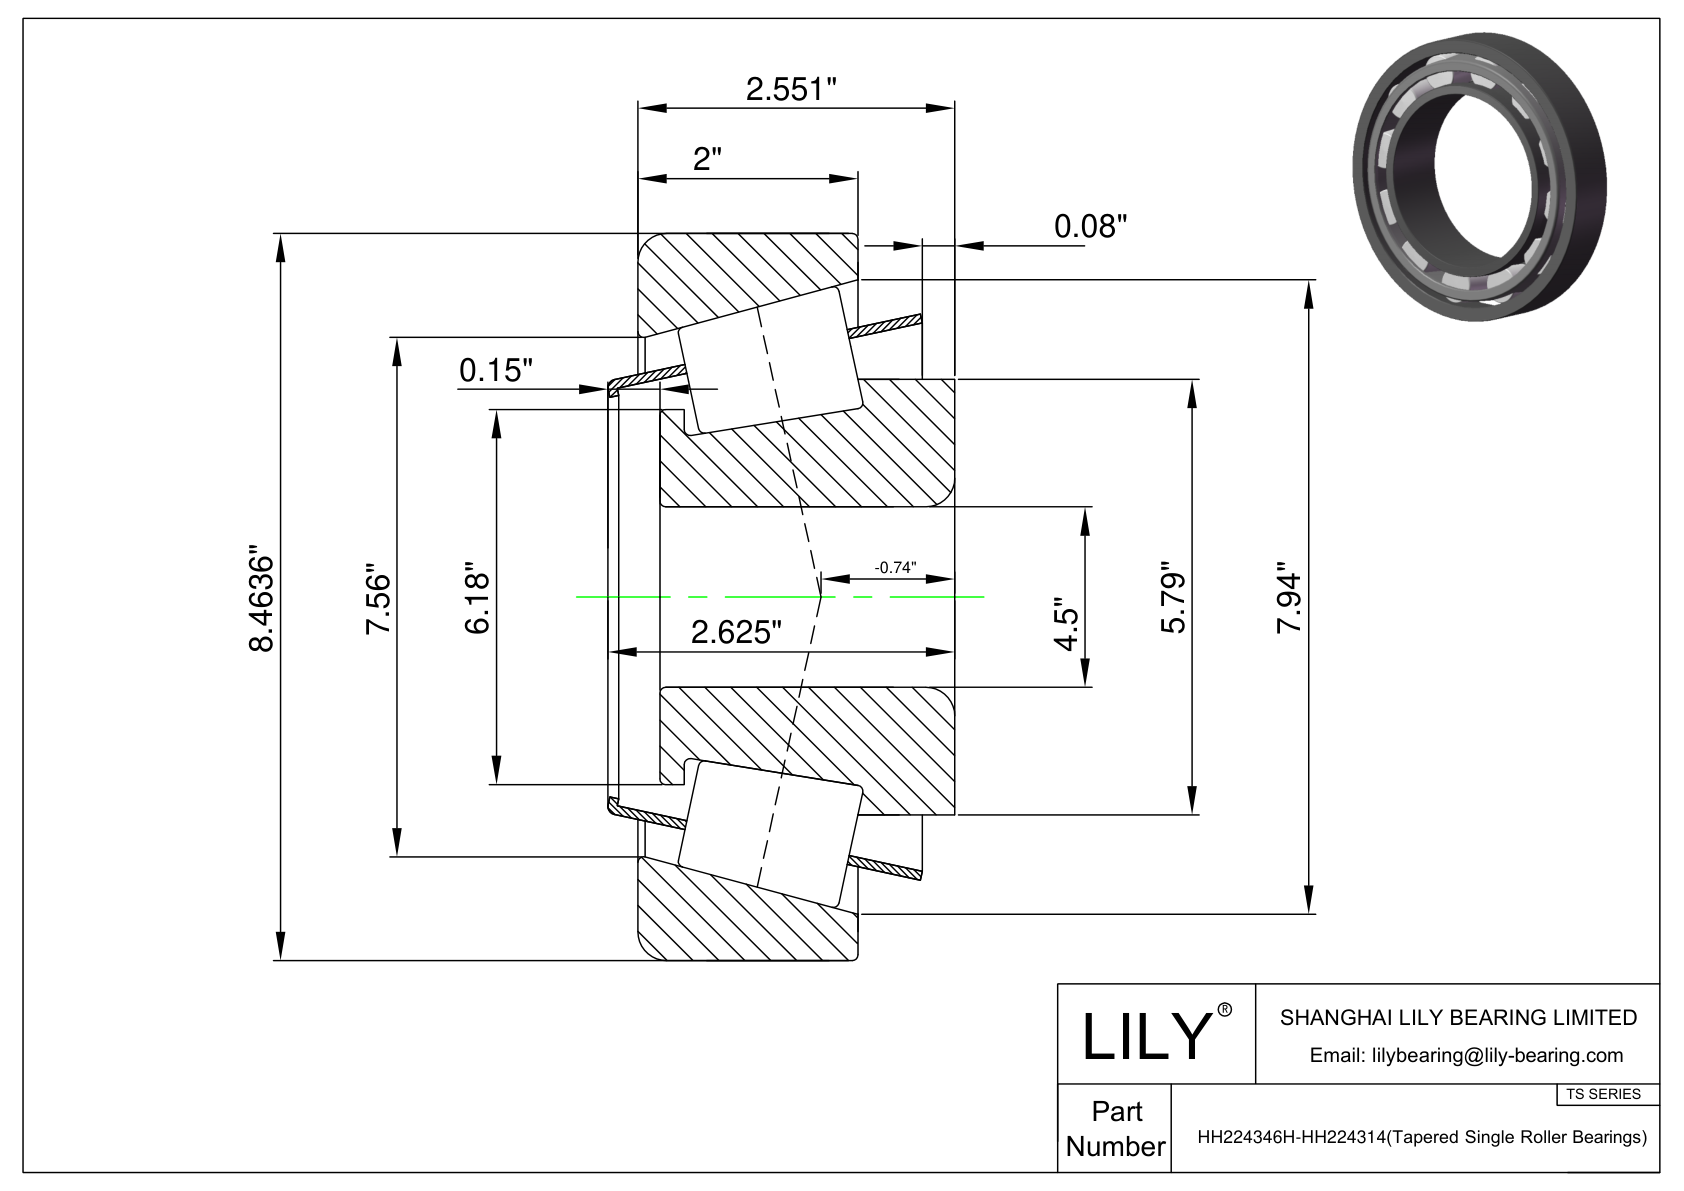 HH224346H-HH224314 TS (Tapered Single Roller Bearings) (Imperial) cad drawing